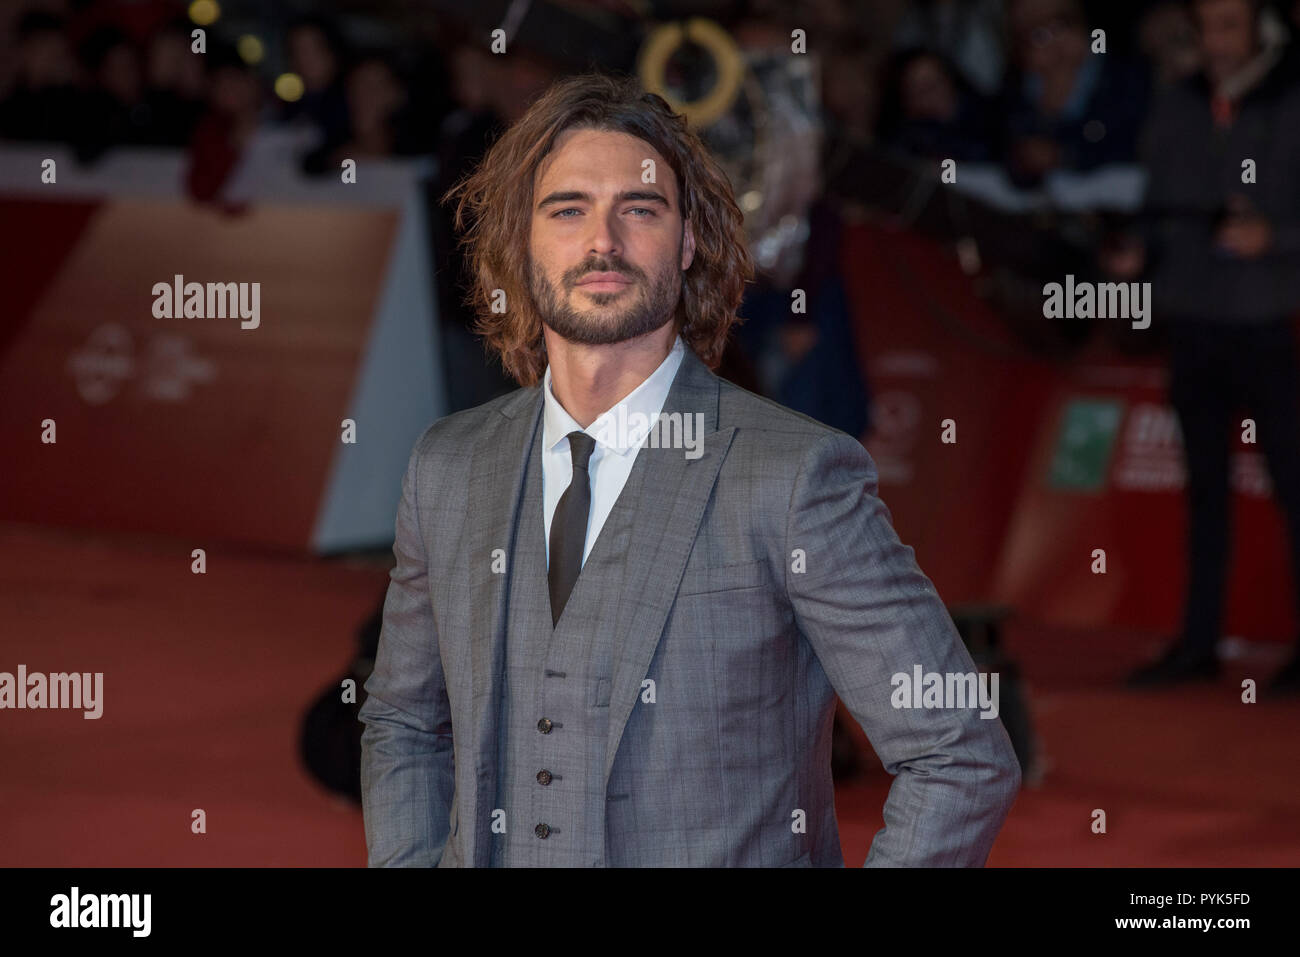 Rome, Italy. 27th October, 2018. Red carpet of Notti Magiche at Rome Film Fest 2018 Credit: Silvia Gerbino/Alamy Live News Stock Photo